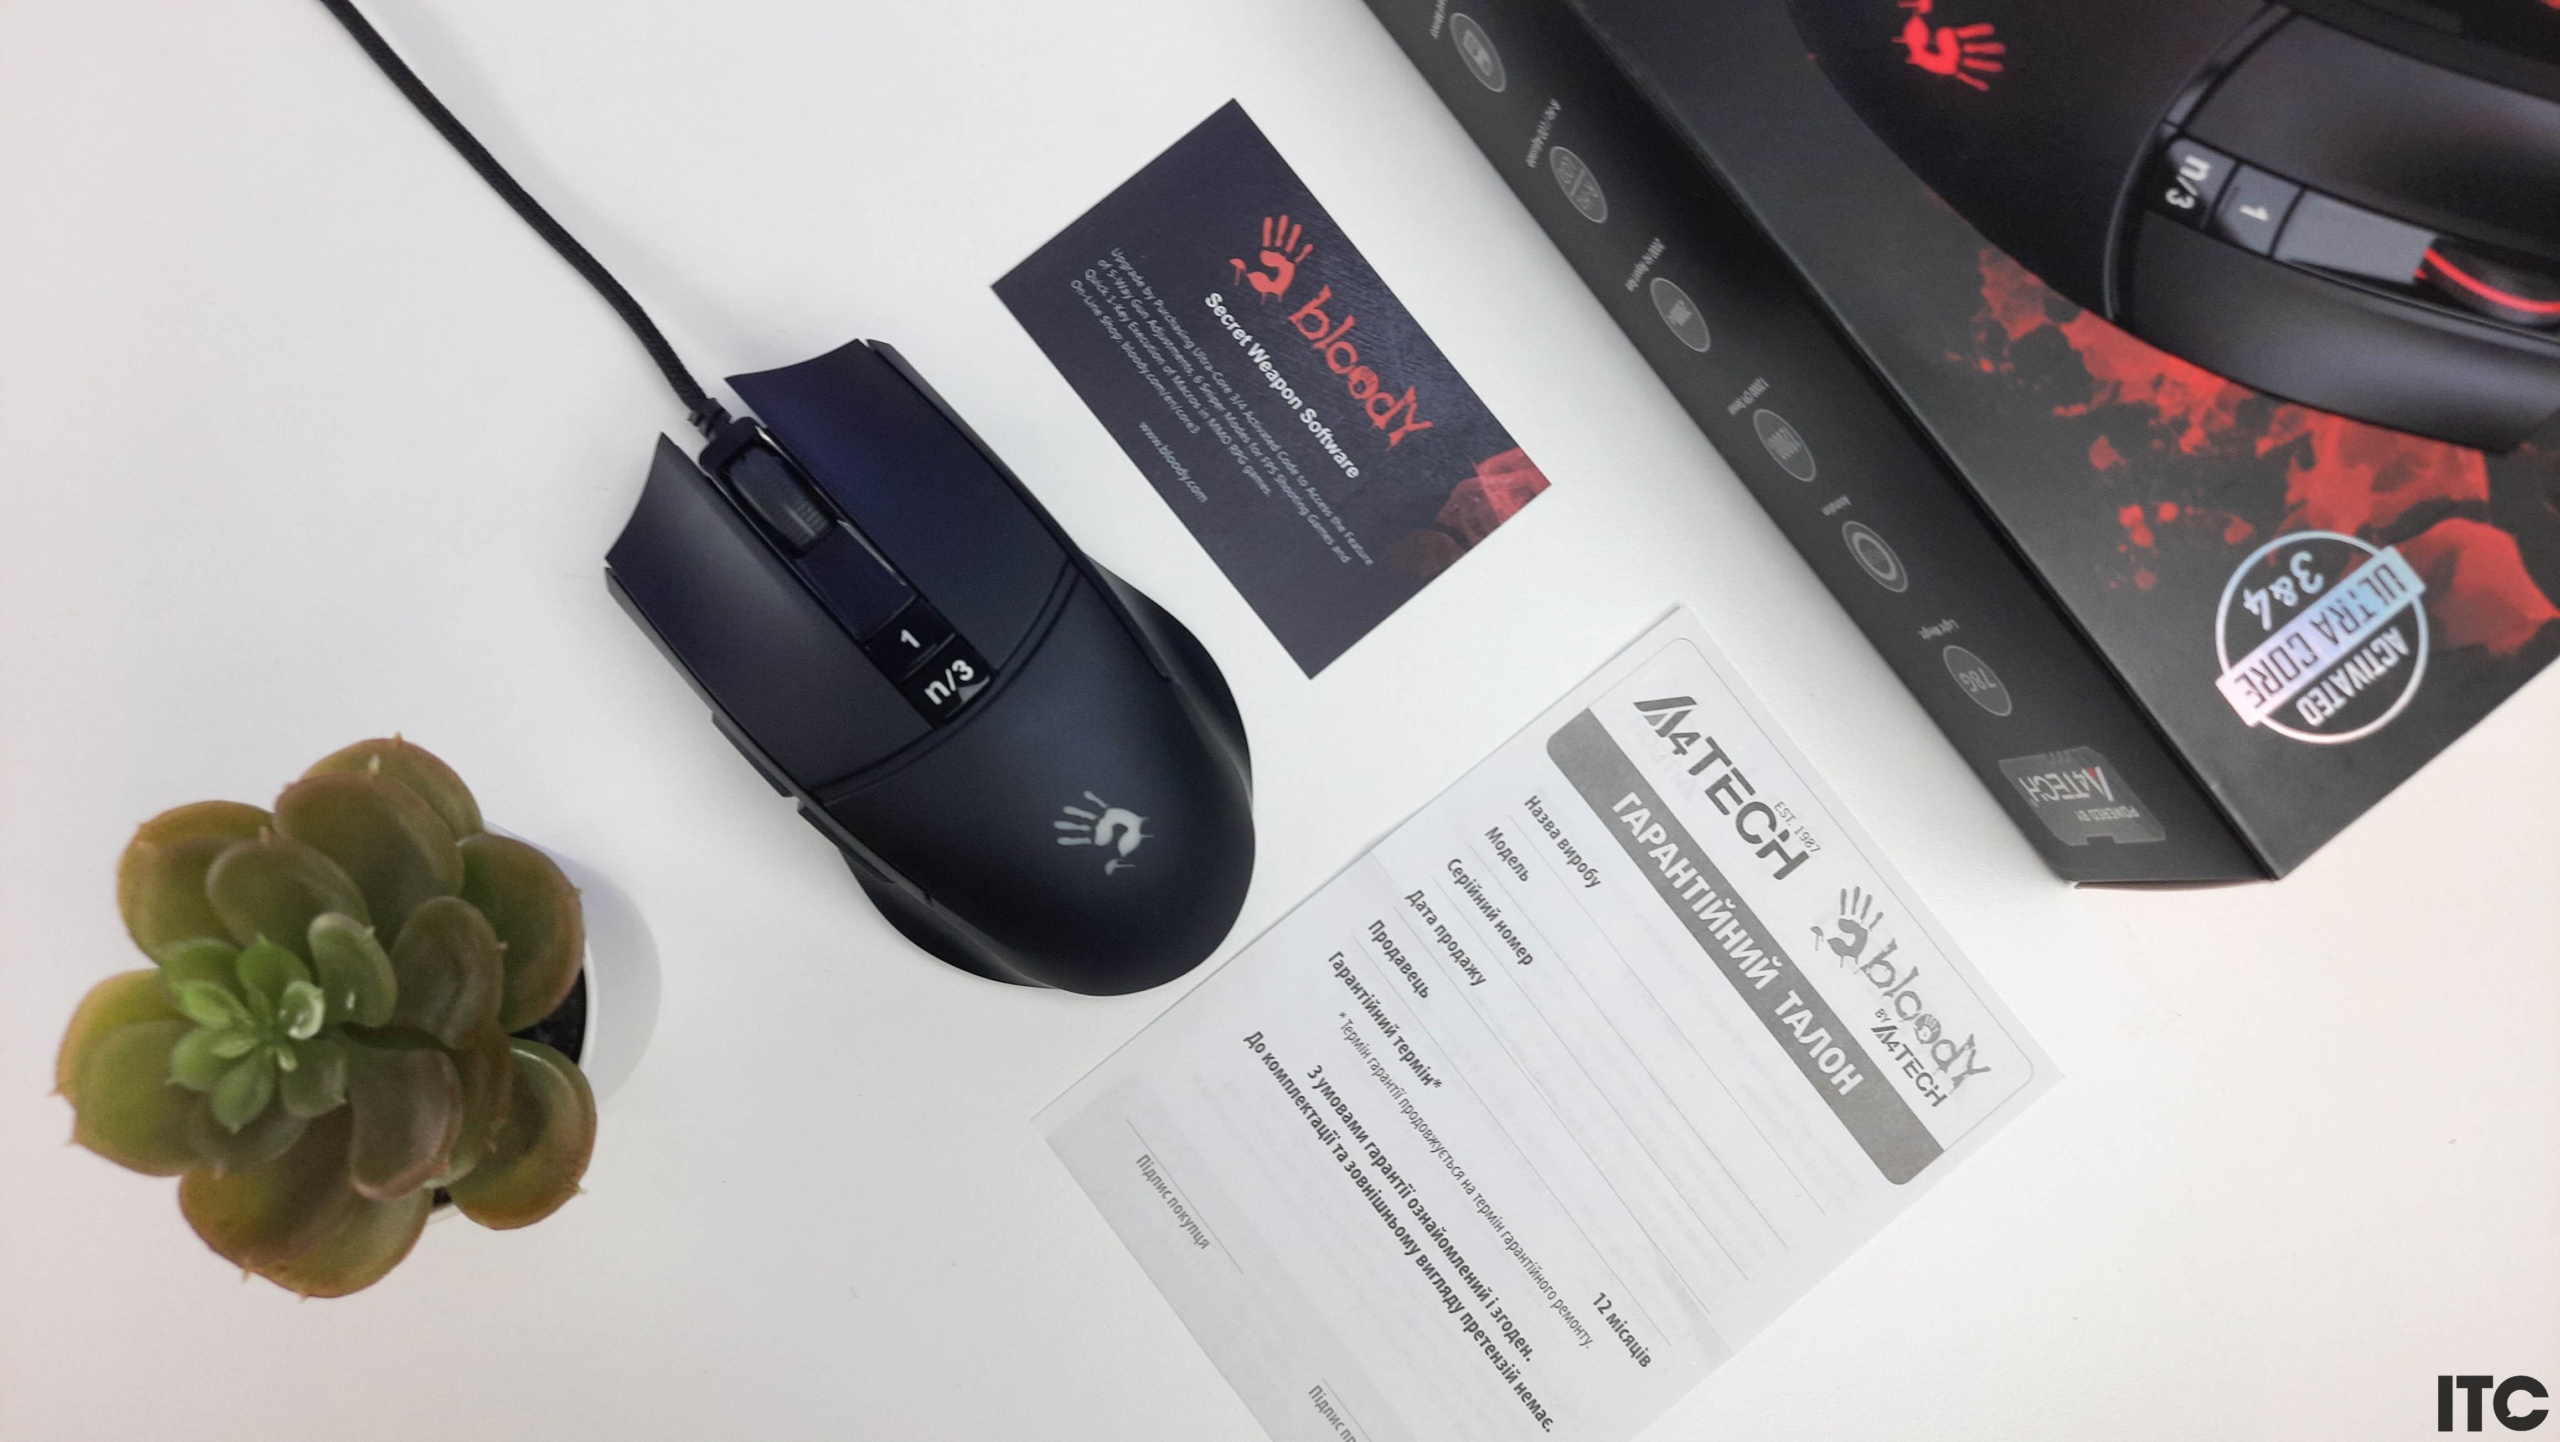 Blacklisted device bloody mouse a4tech rust решение disconnected фото 82